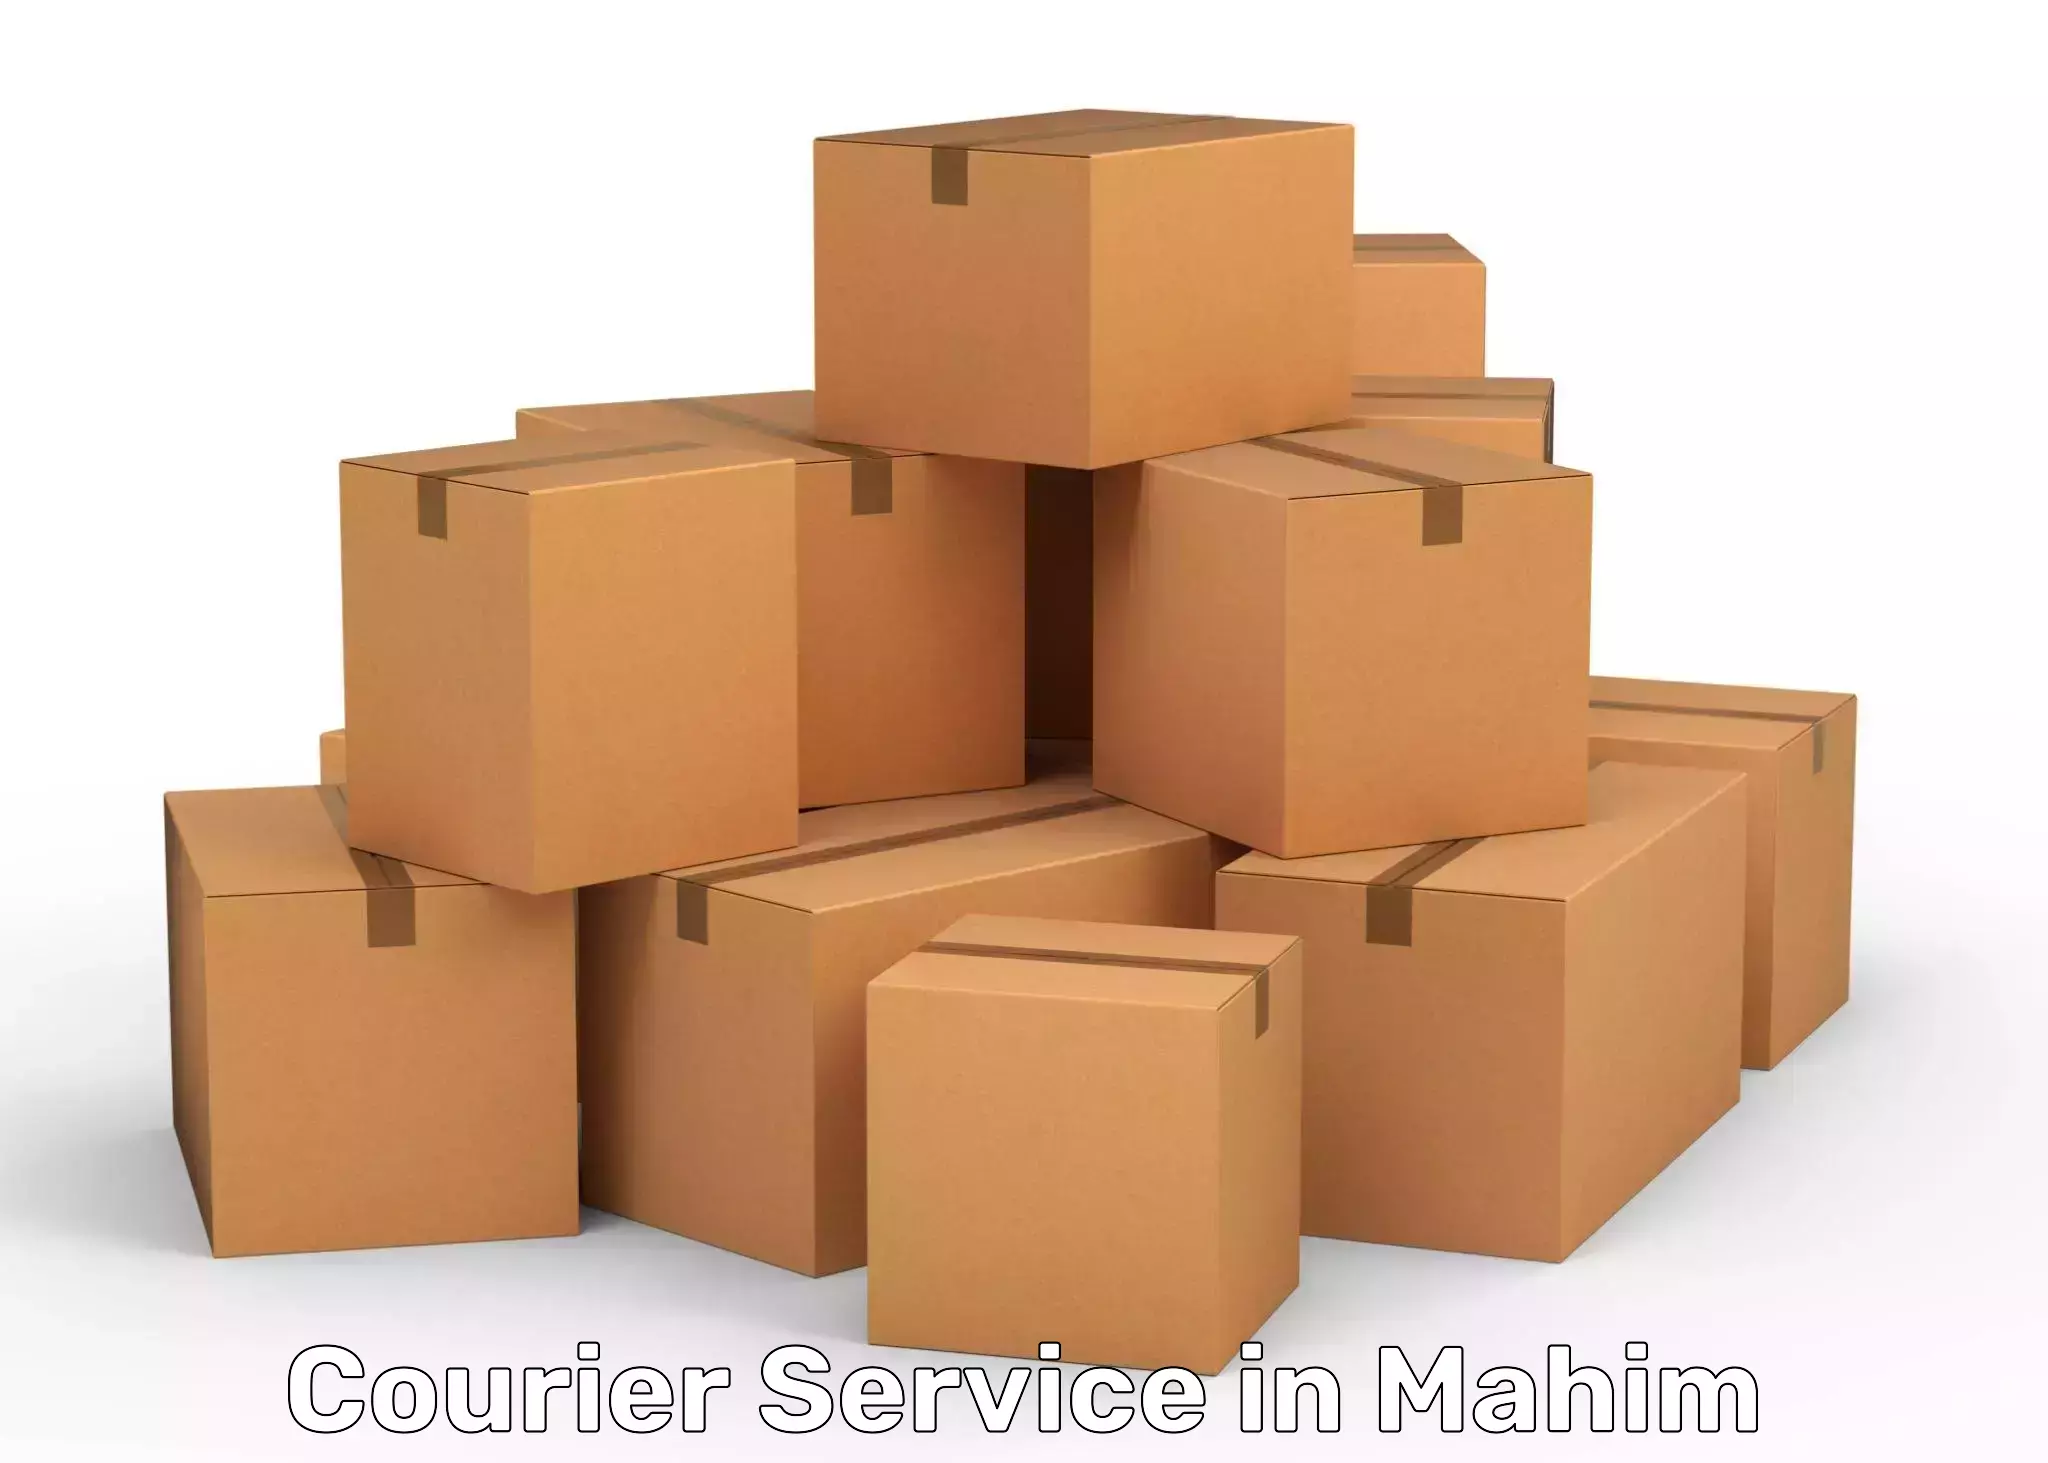 Urban courier service in Mahim